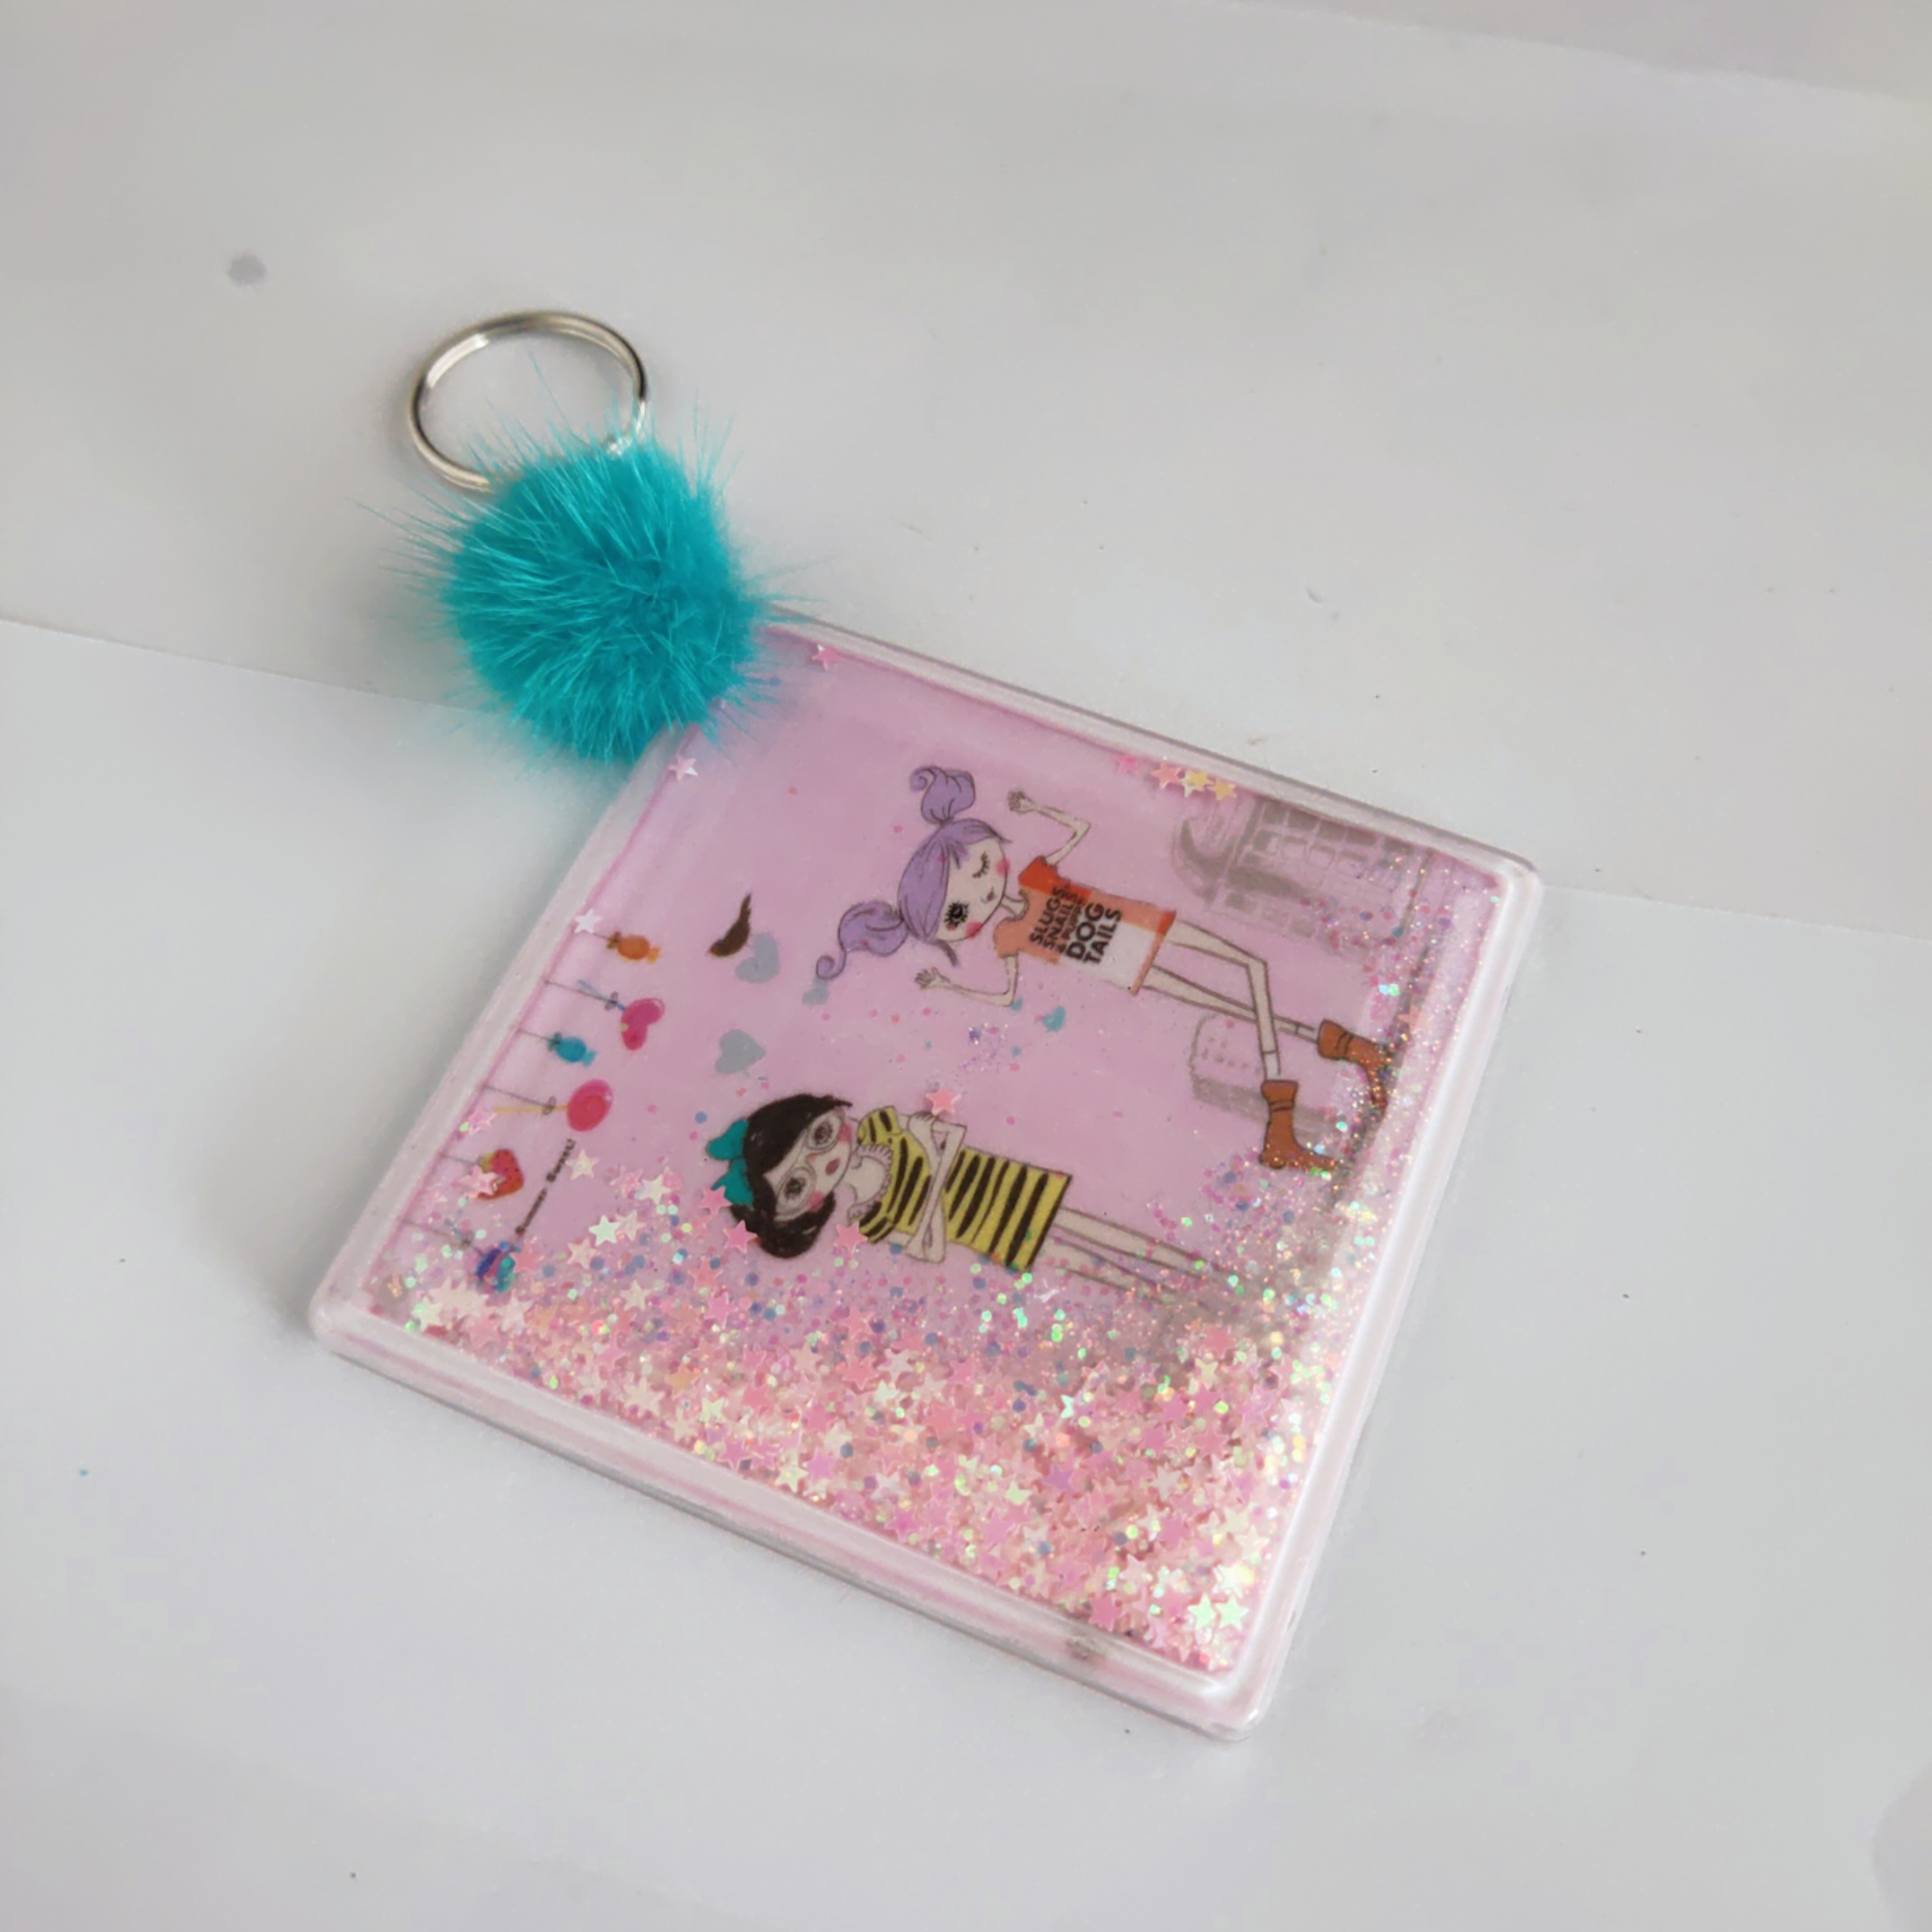 Square Fluiding glitter one side mirror with Pompom charm for cheap